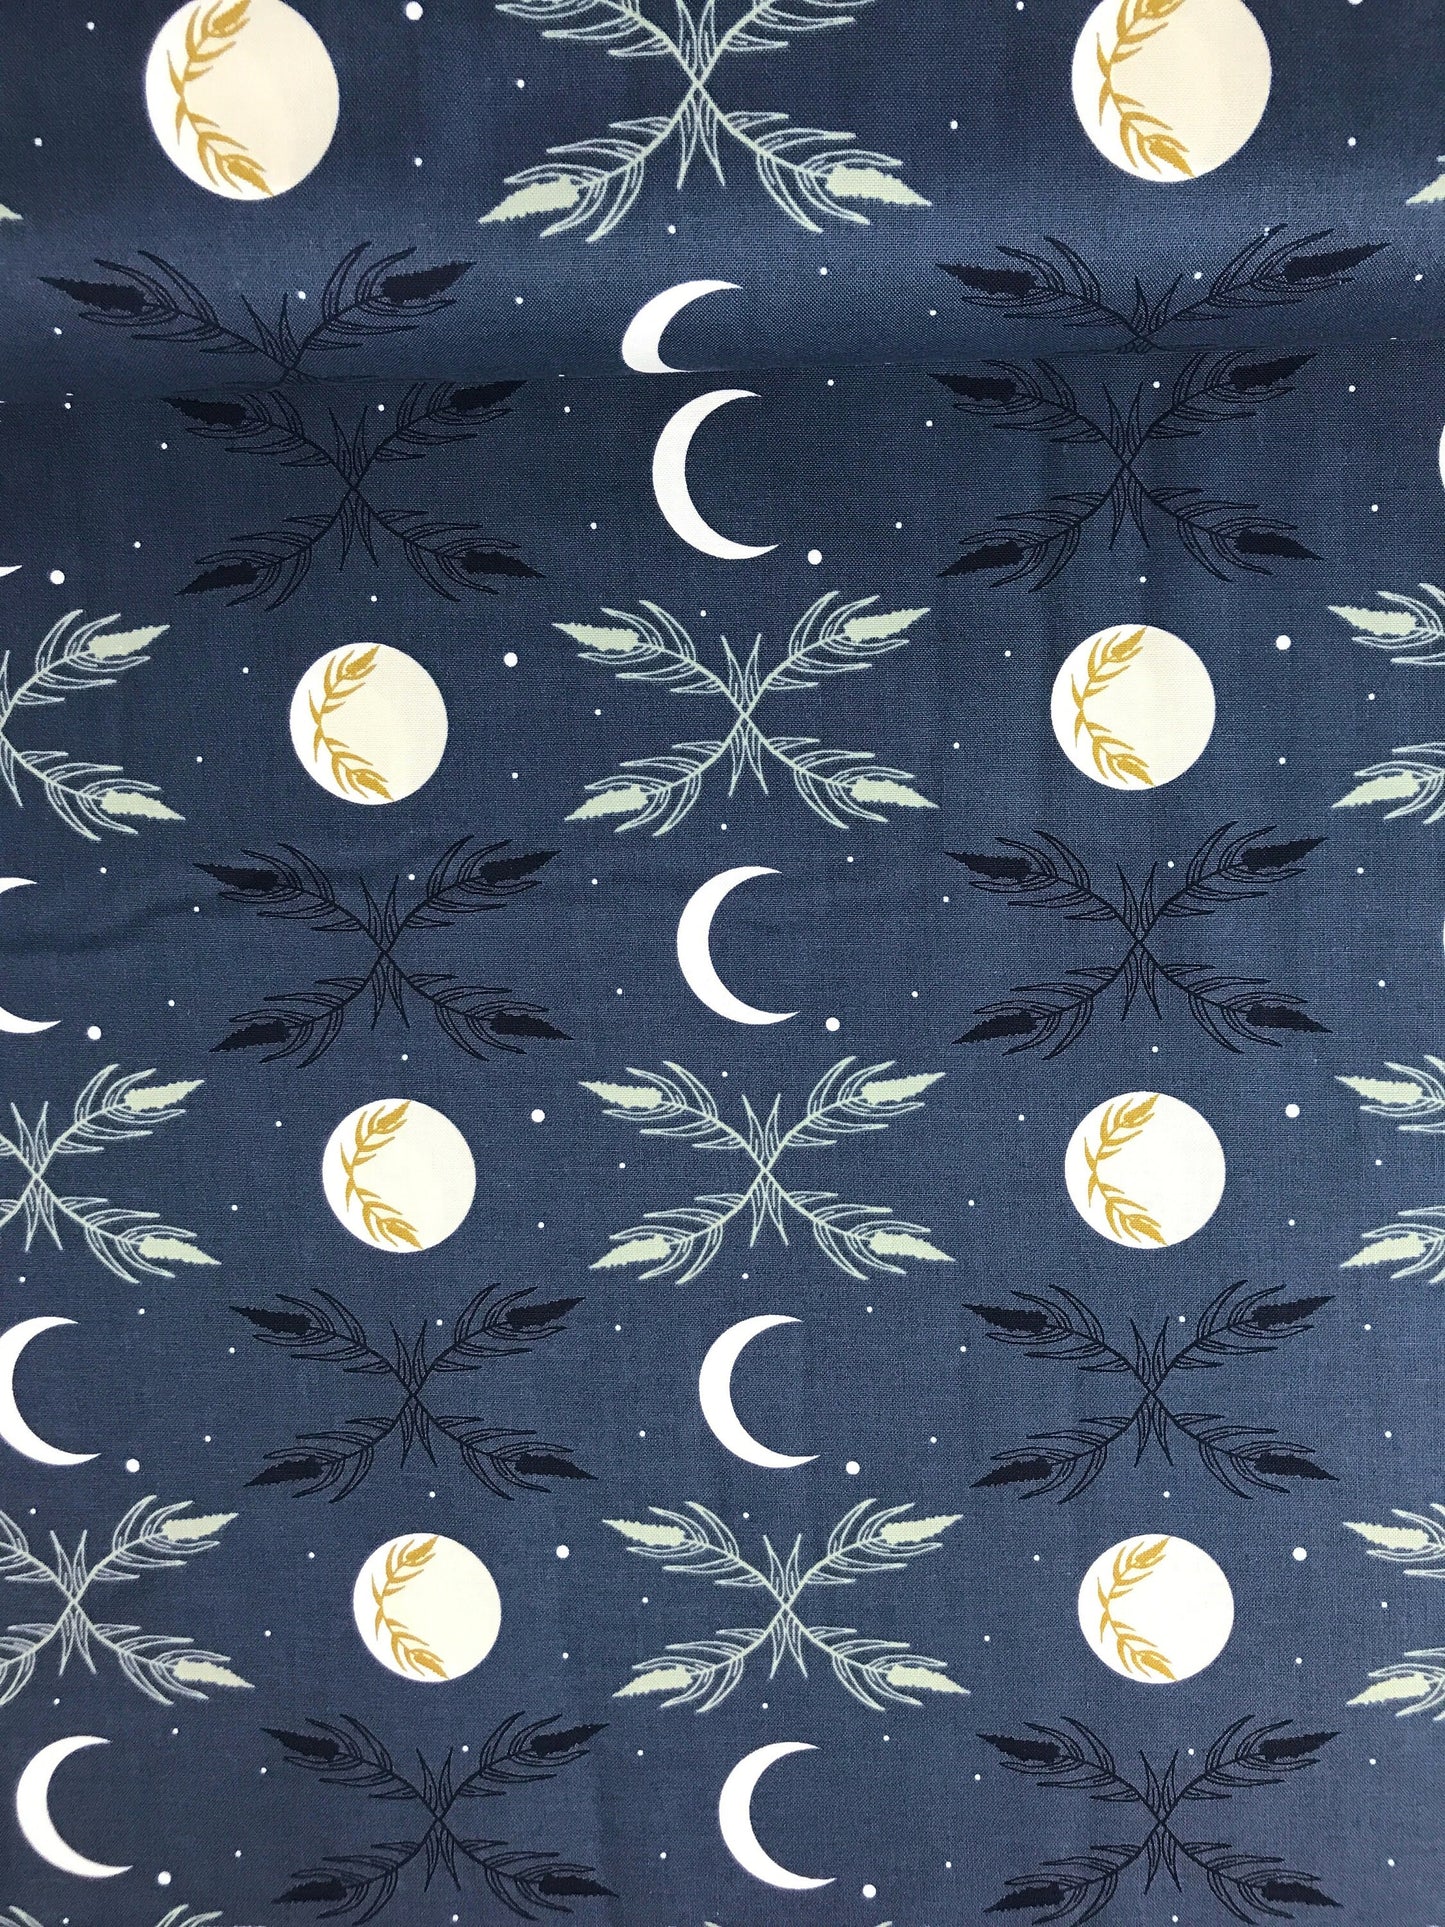 Harvest Moon Night - Camp Creek -  Ash Cascade - Cotton + Steel - Quilters Cotton AC100-NI1